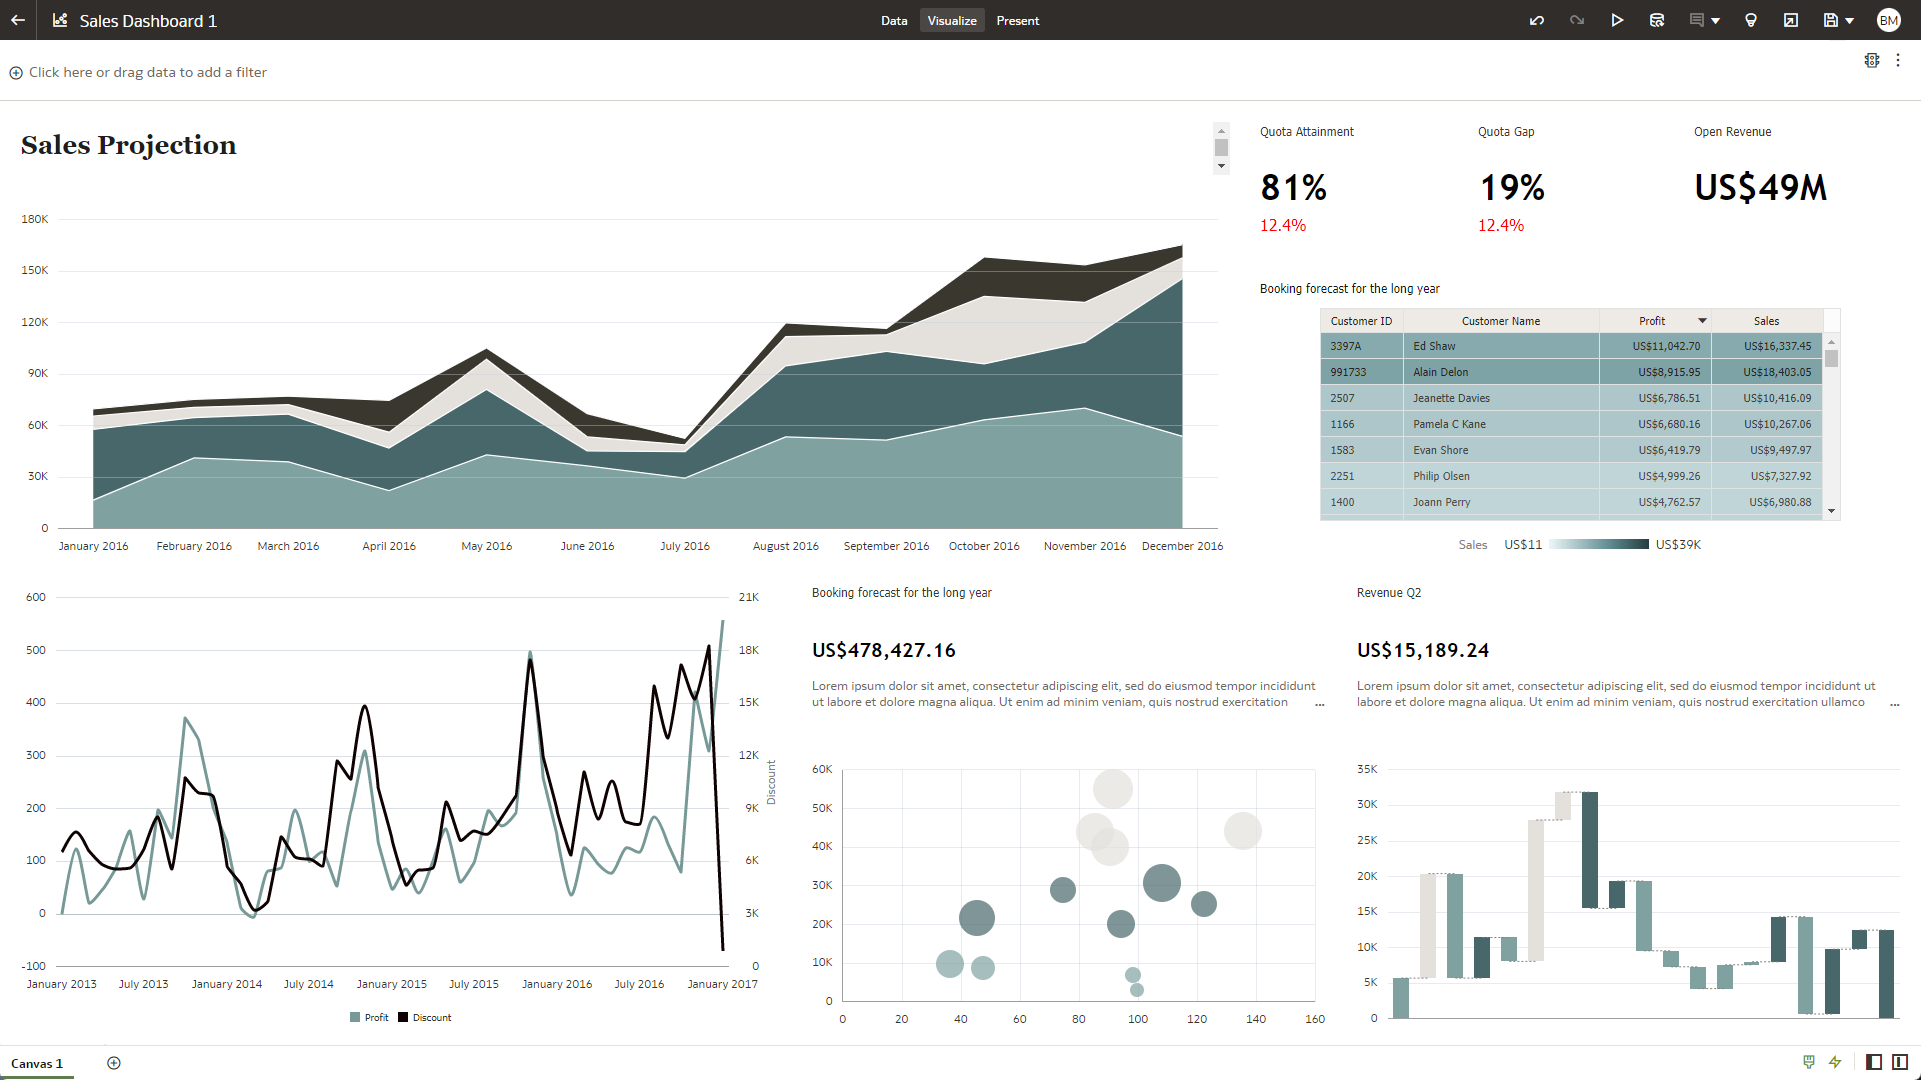 Harness Oracle Analytics for visual data exploration and storytelling. Empower anyone with a powerful code-free drag-and-drop interface. See signals in data and make complex ideas engaging, meaningful and easy to understand.